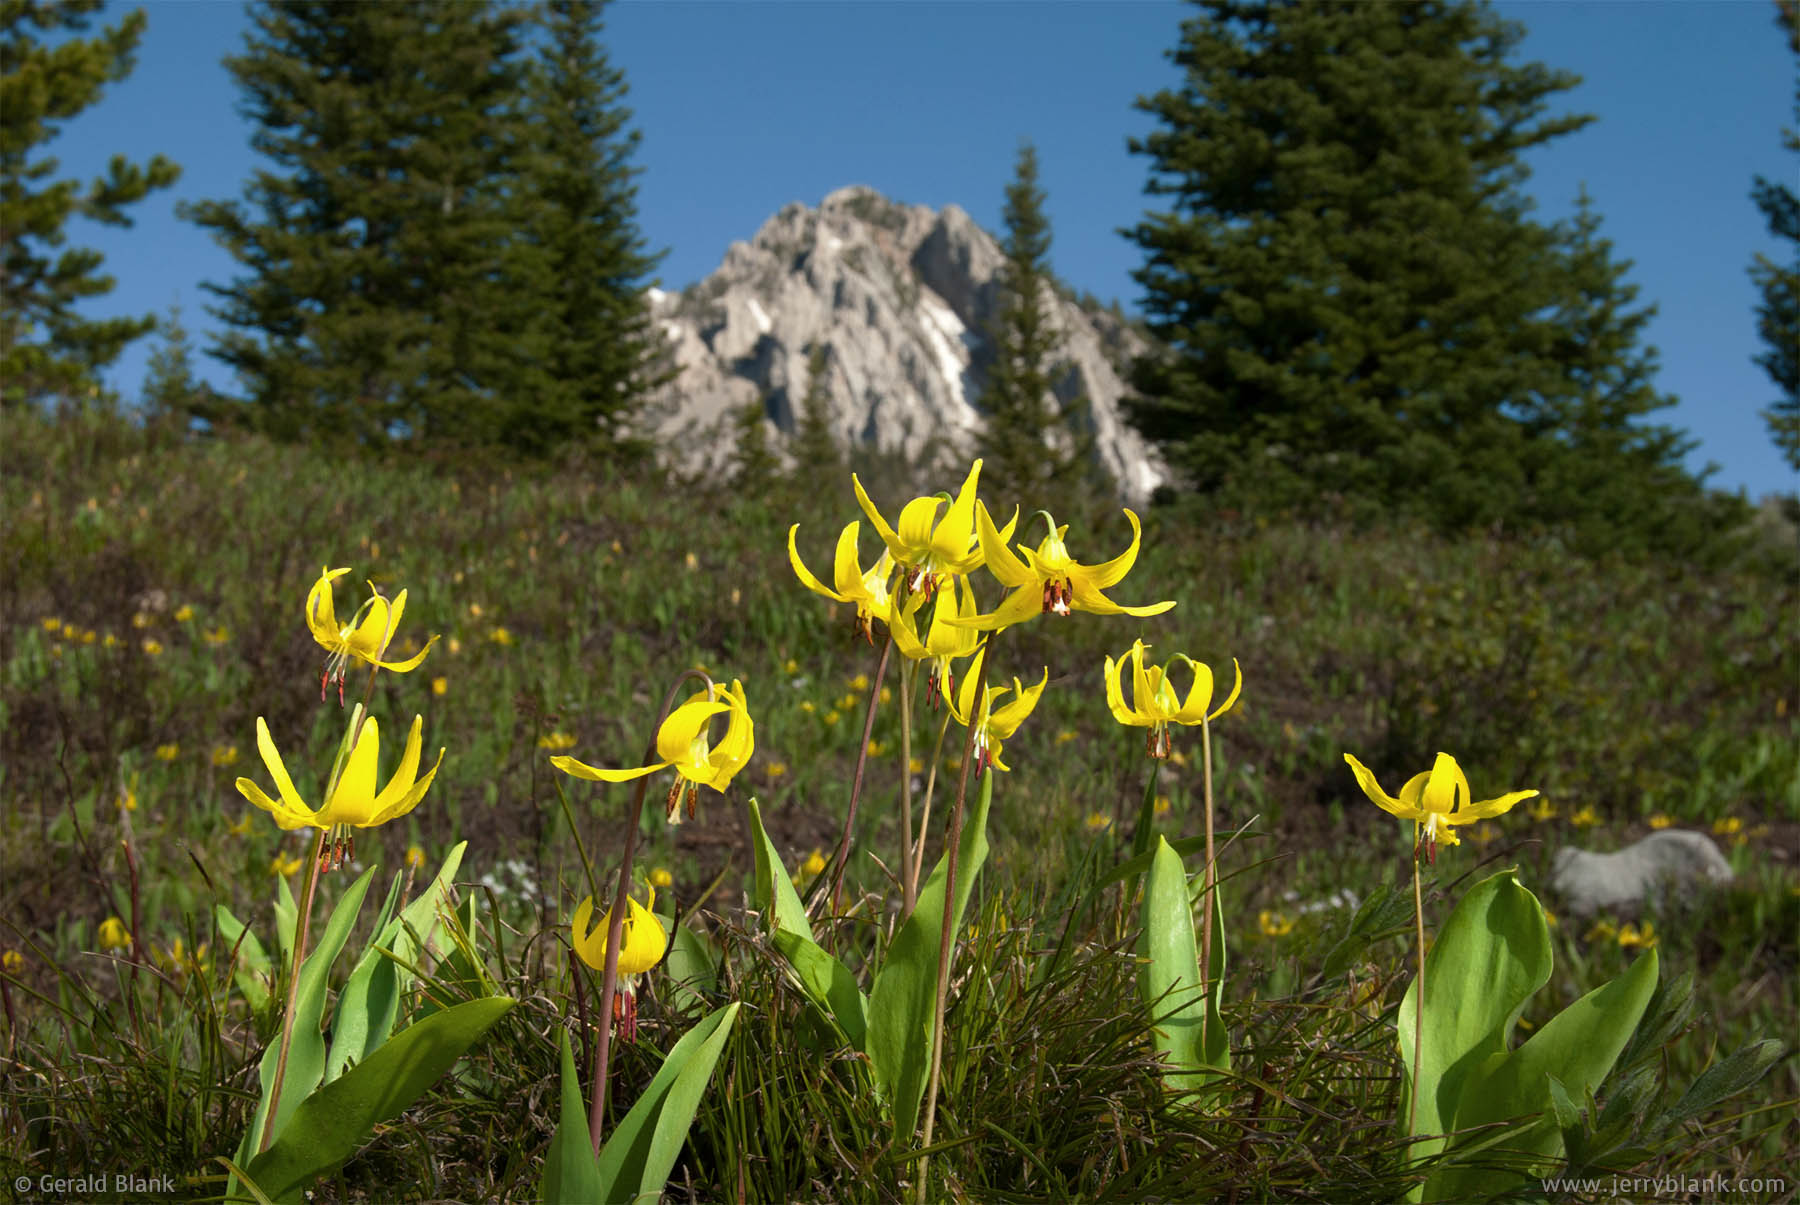 #07986 - Glacier lilies carpet the slopes below Ross Peak in Montana, as the snow recedes in June